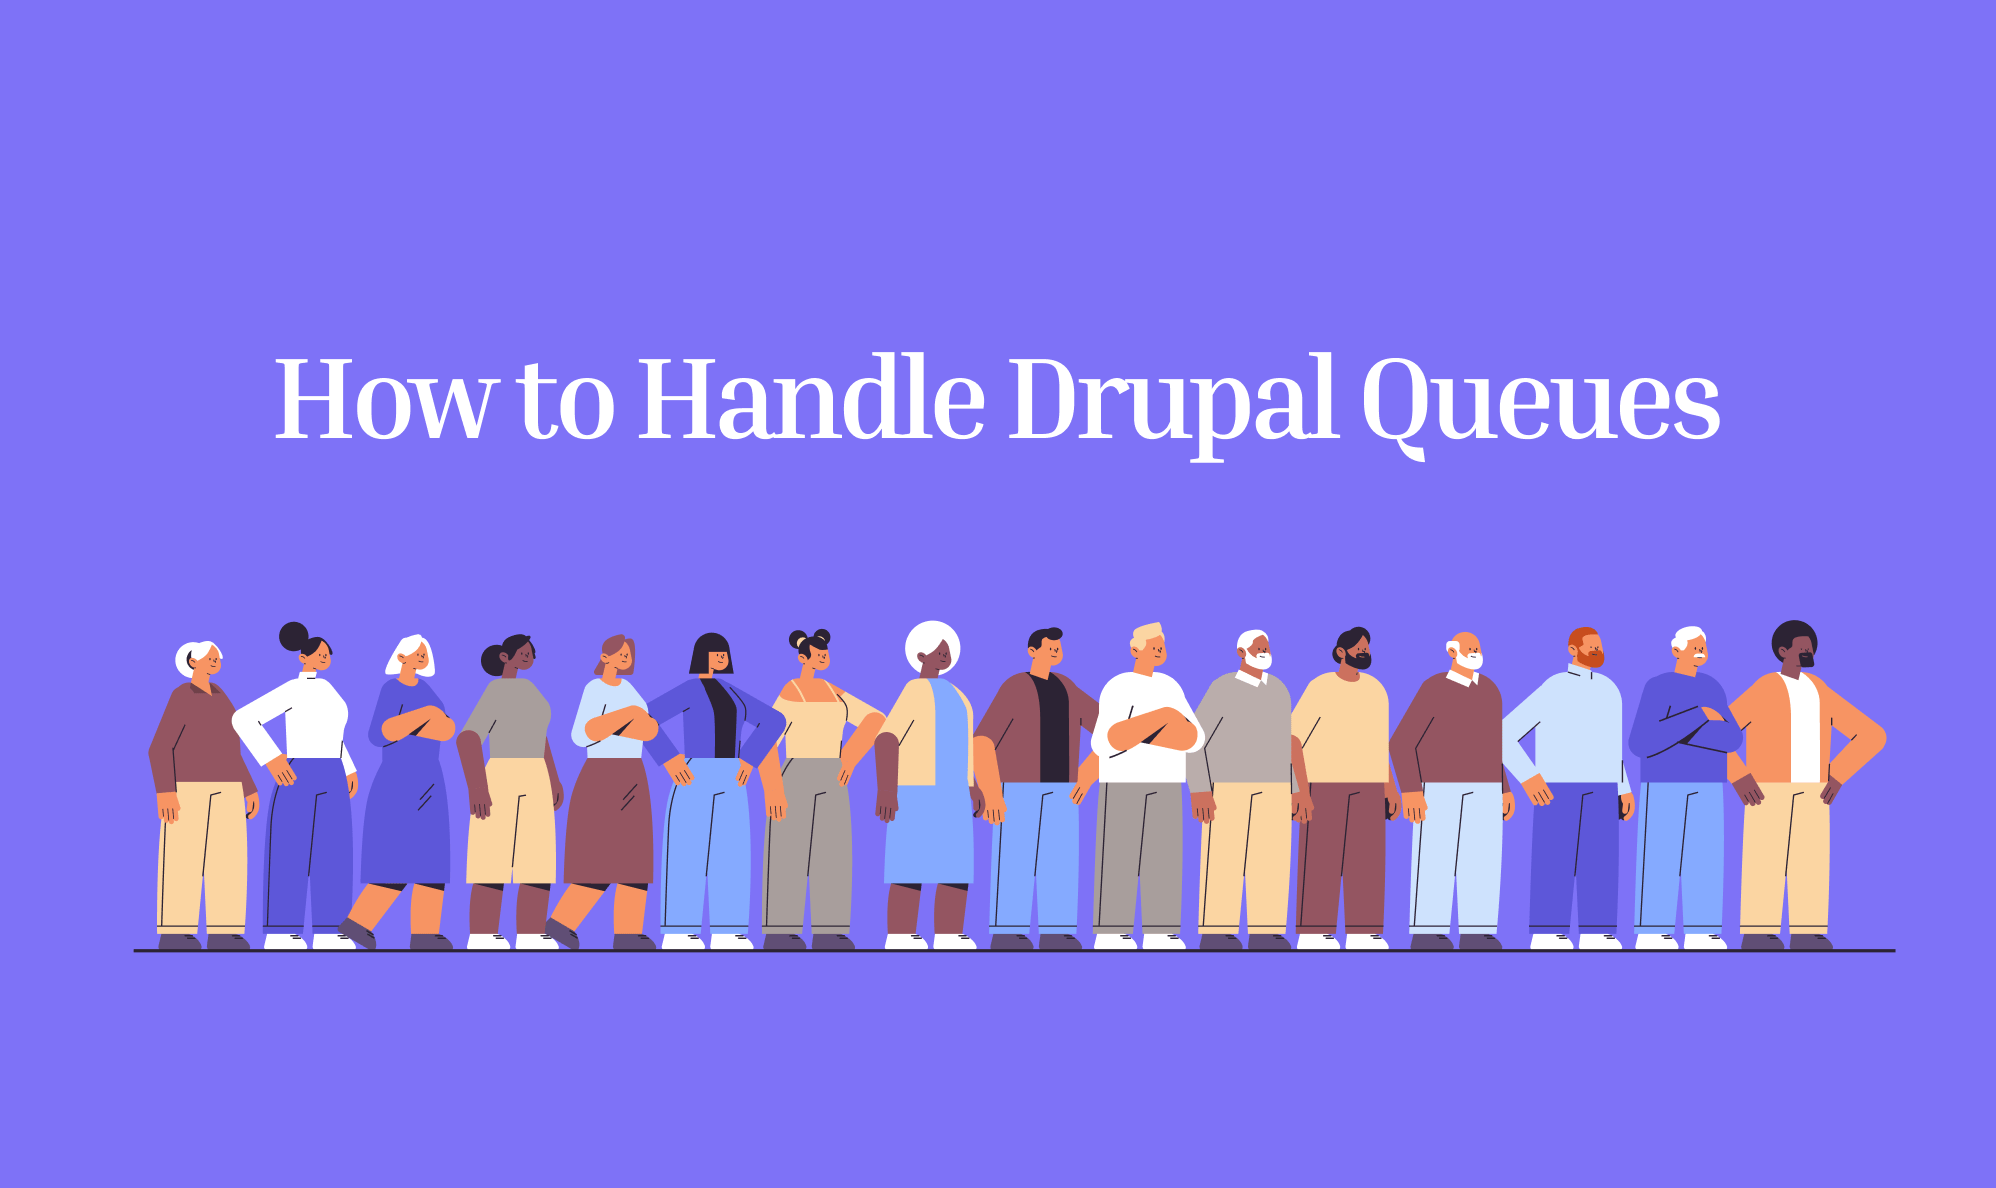 How to Handle Drupal Queues